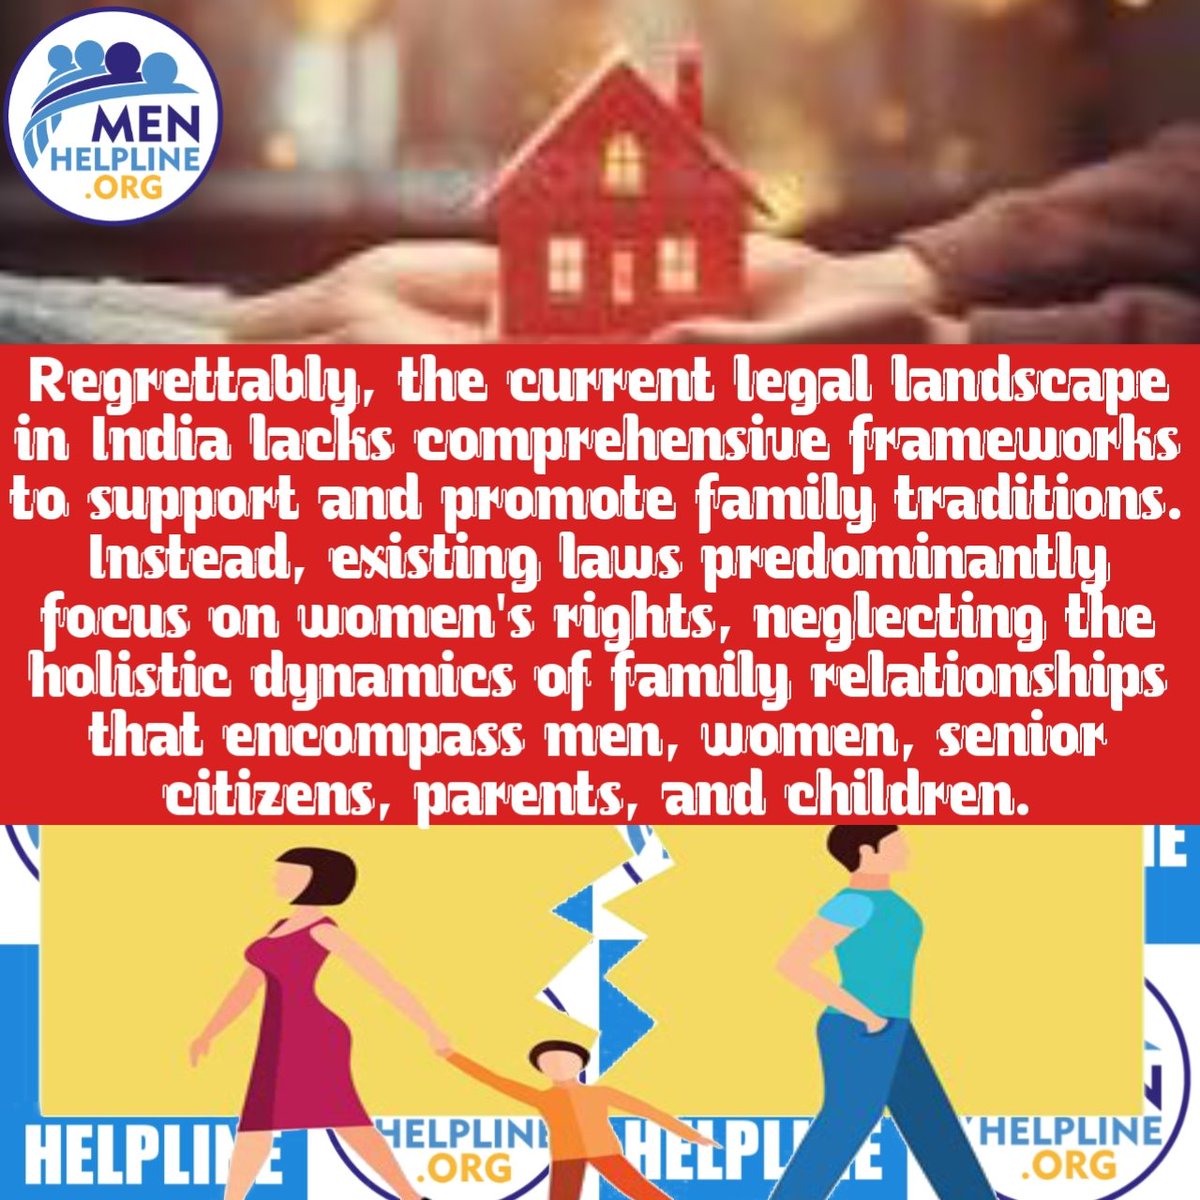 Laws primarily focus on women's rights which have neglected the overall dynamics of family relationships. Sadly, all these #biasedlaws have led to the decline of our #familytradition .

India needs #FamilyCell not the #womenCell

#mensrights #mensday #WomensDay #cheatingwife